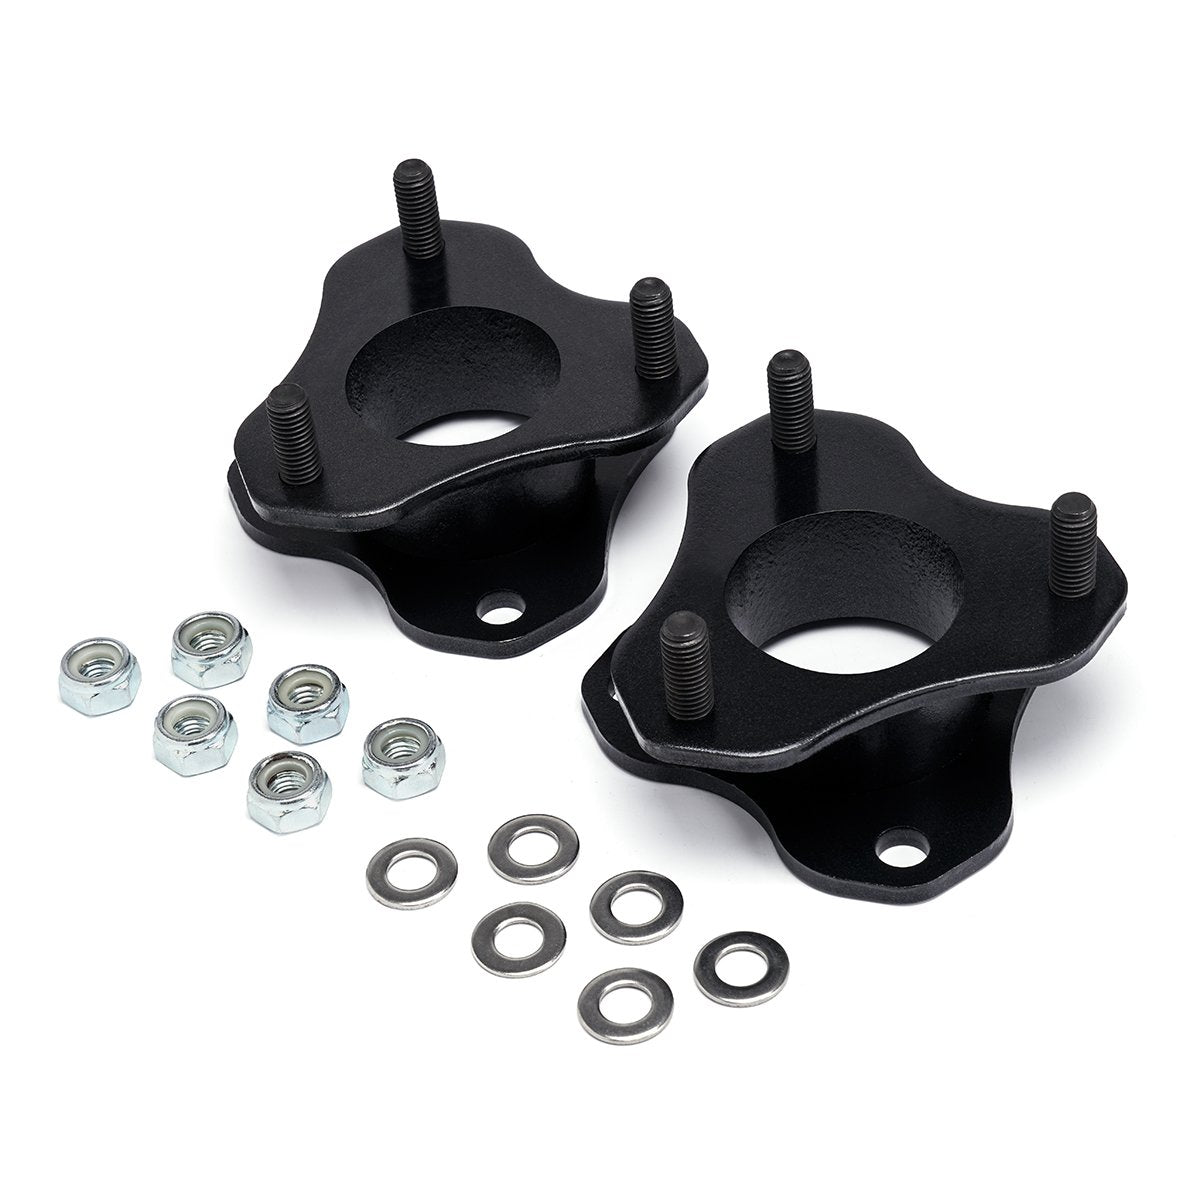 2009-2020 Dodge Ram 1500 4WD Full Steel Front + Rear Spacers Lift Kit Coil Spring Compressor Tool